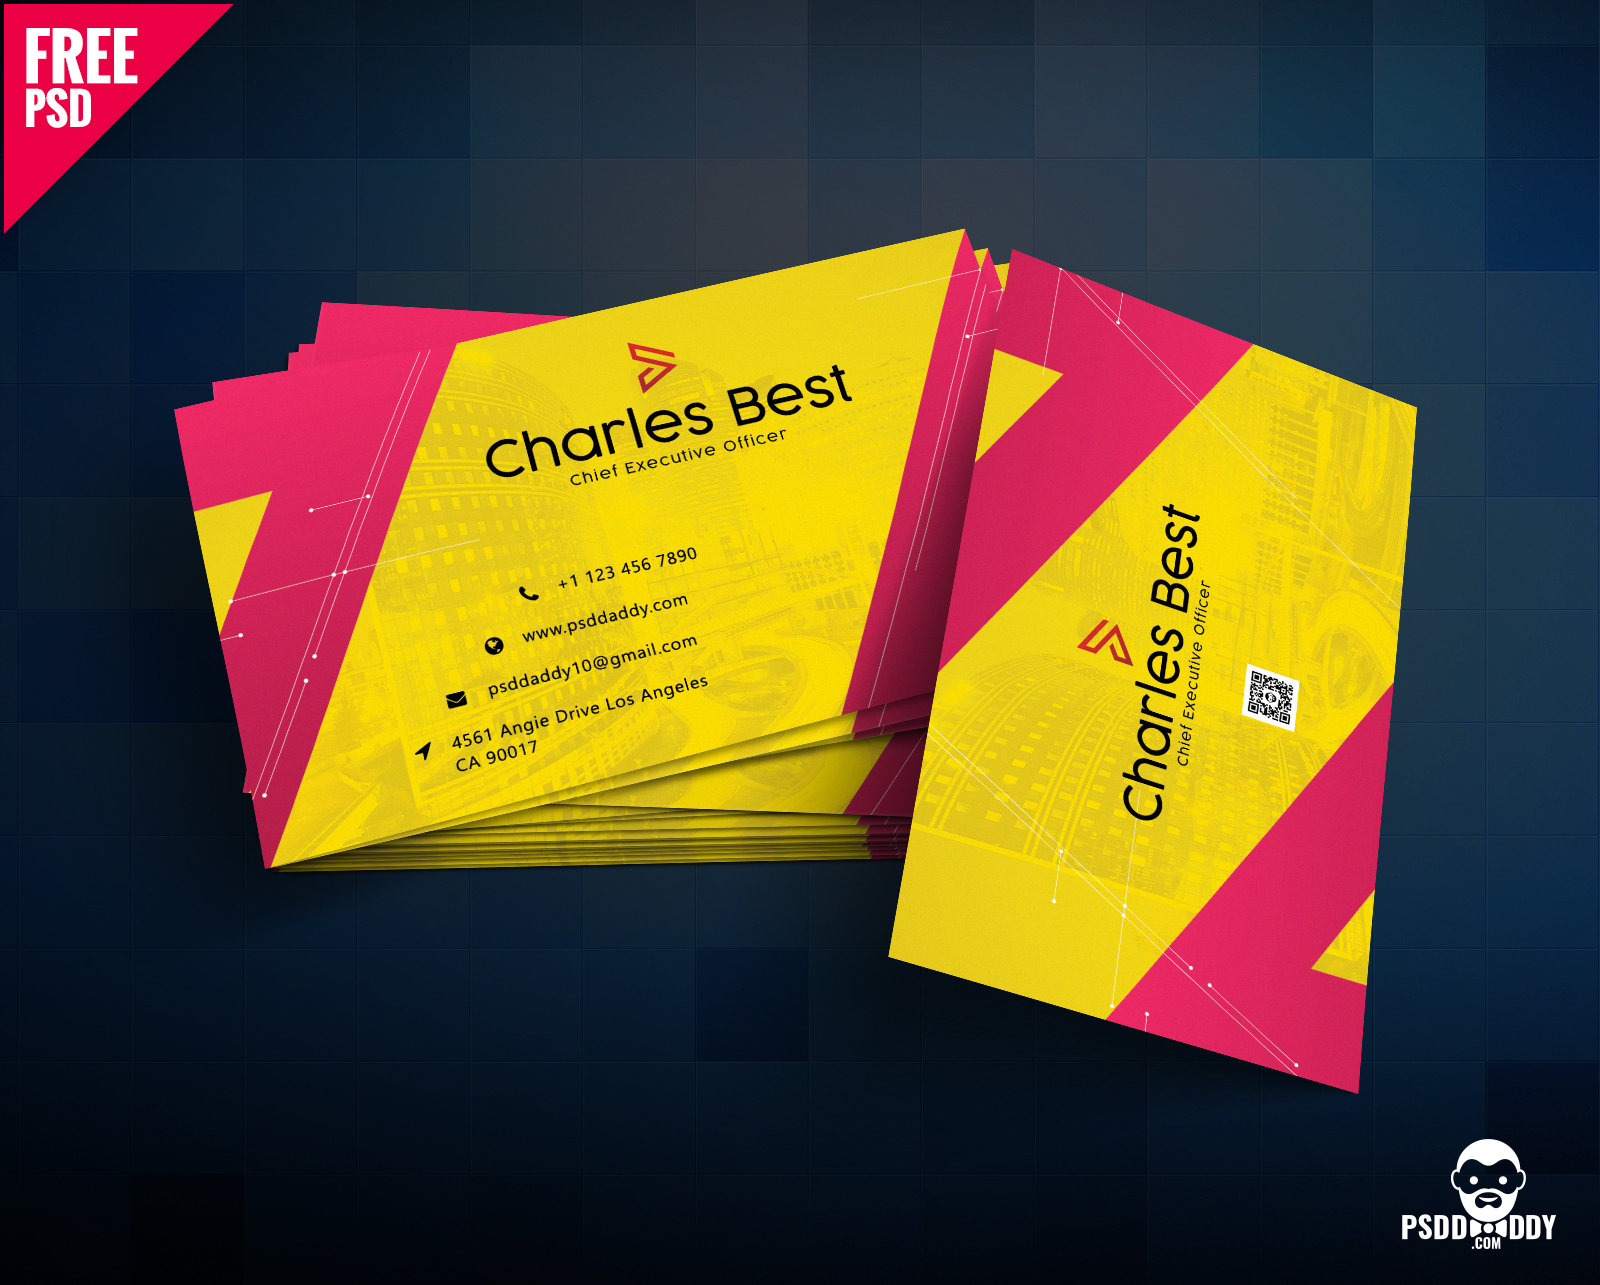 Download] Creative Business Card Free Psd | Psddaddy Pertaining To Psd Visiting Card Templates